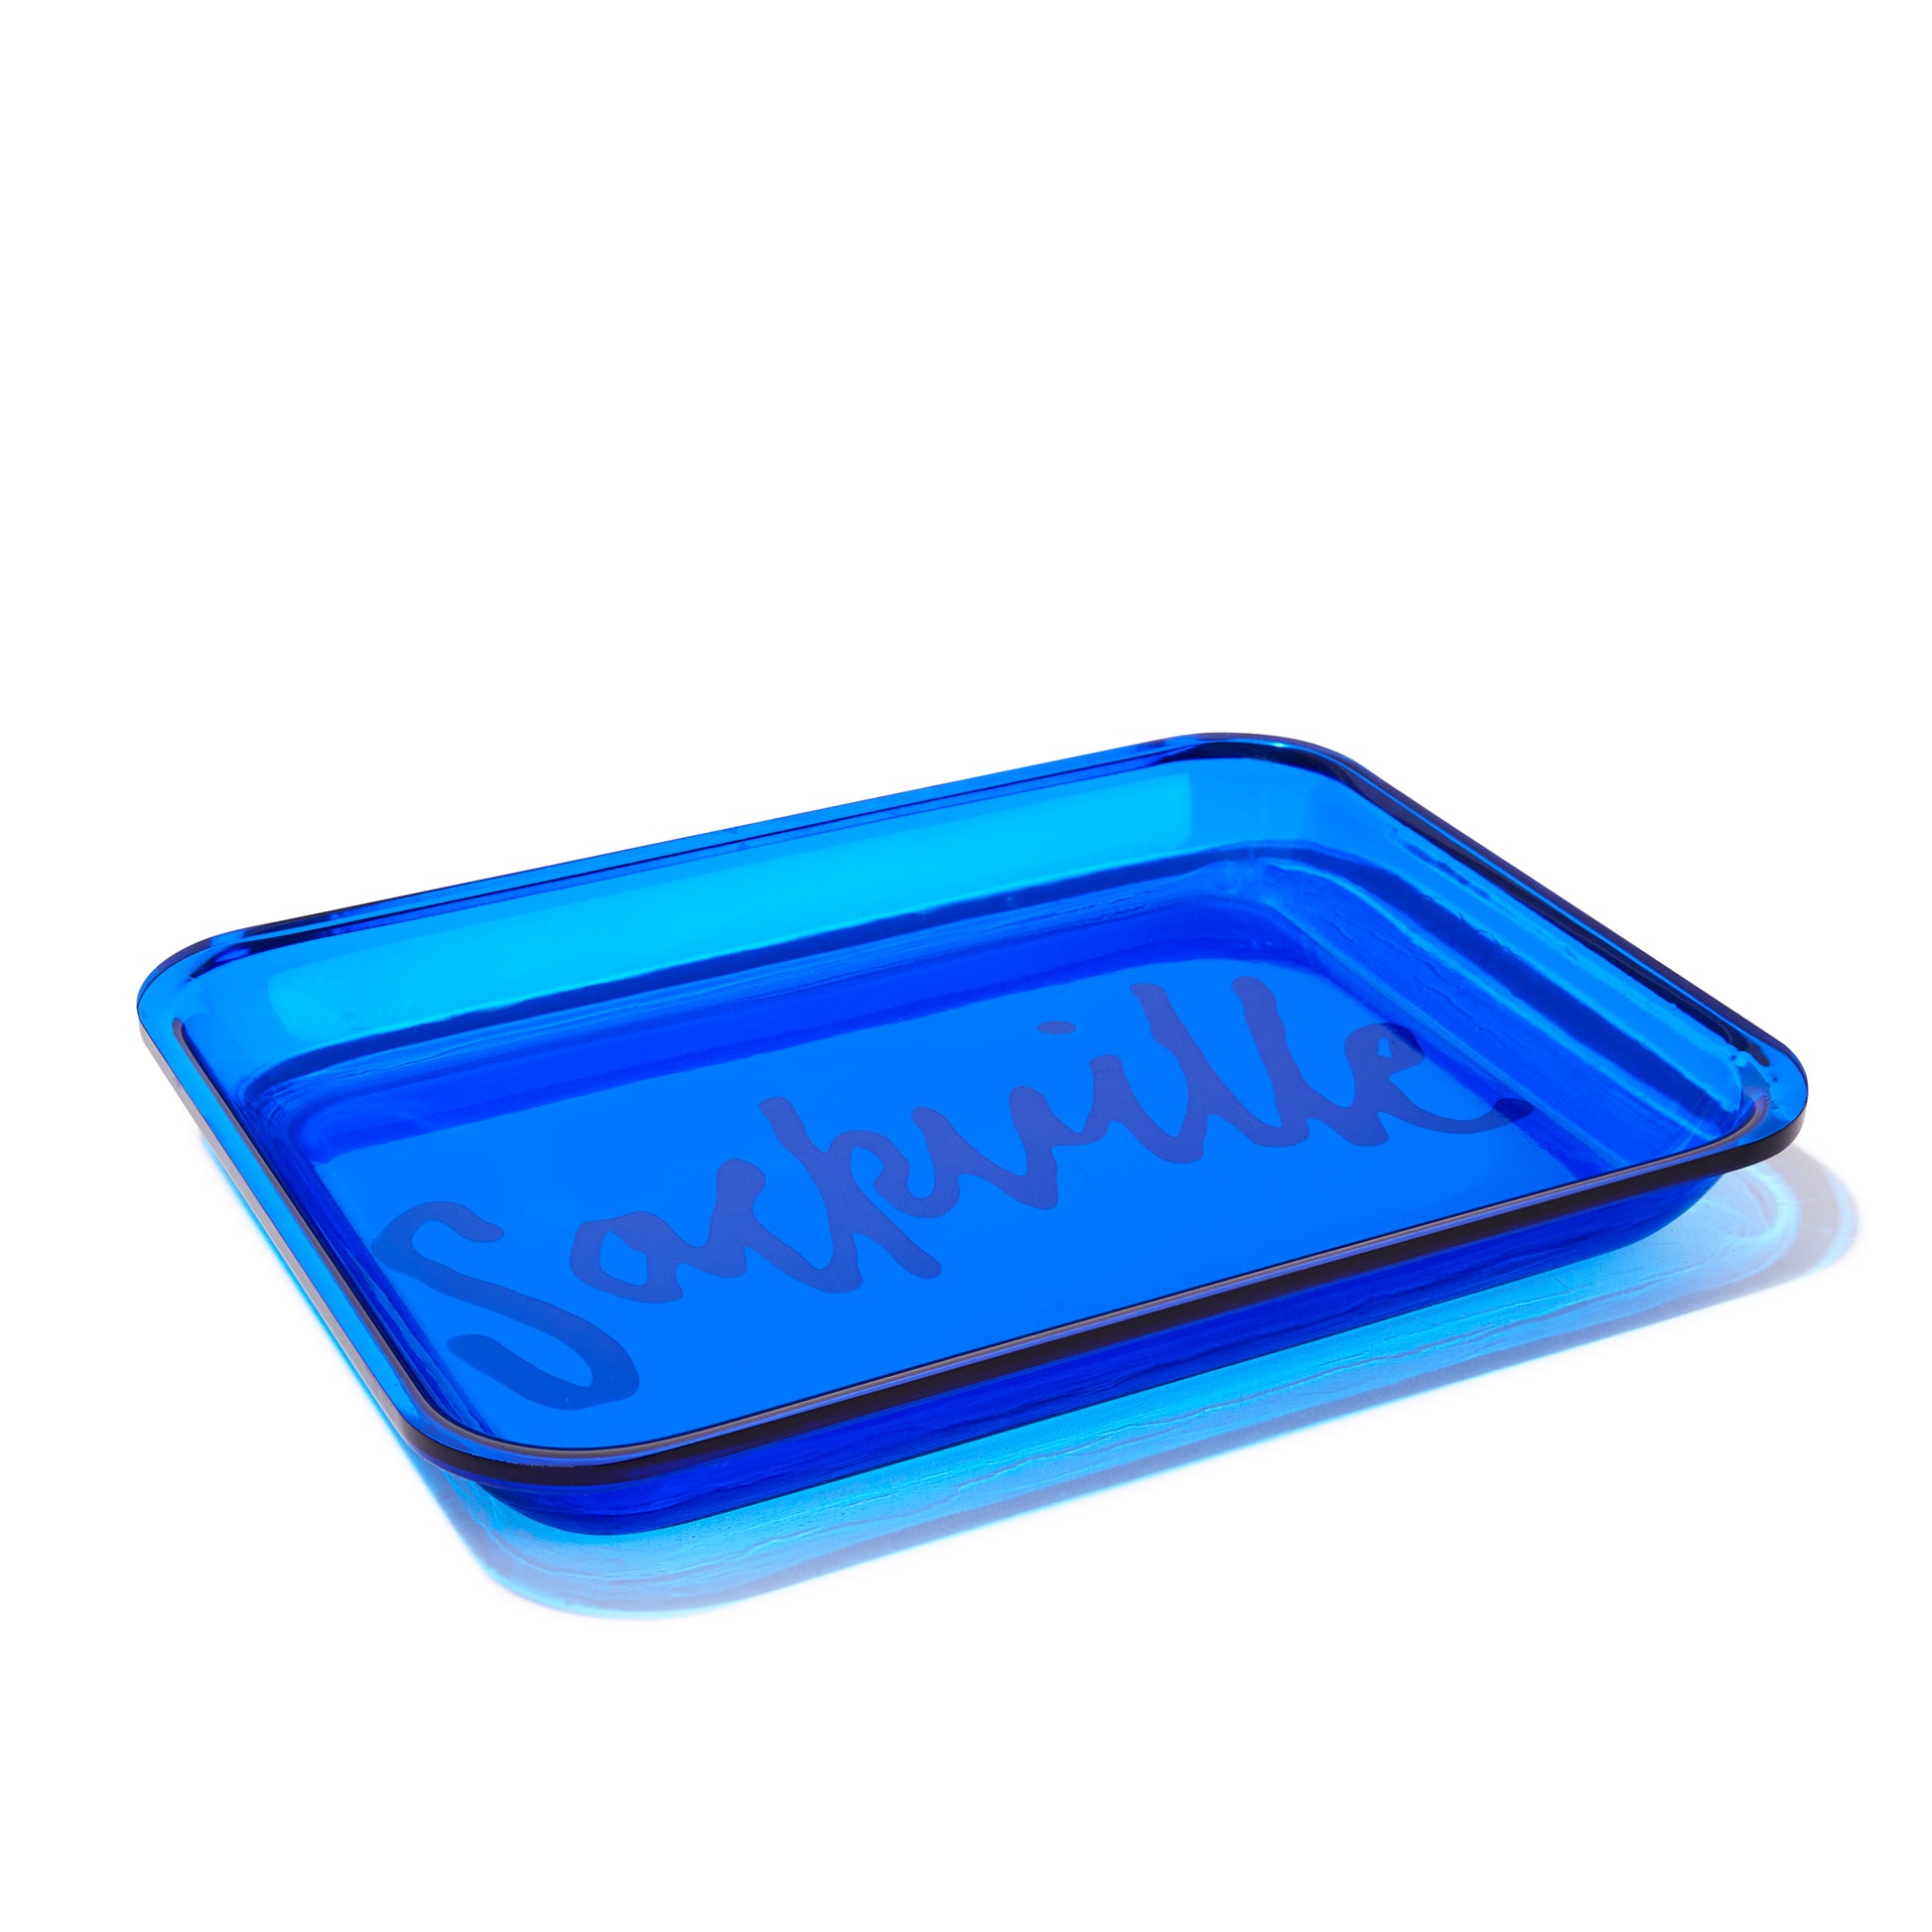 BLUE GELLY ROLLING TRAY - Sackville & Co.